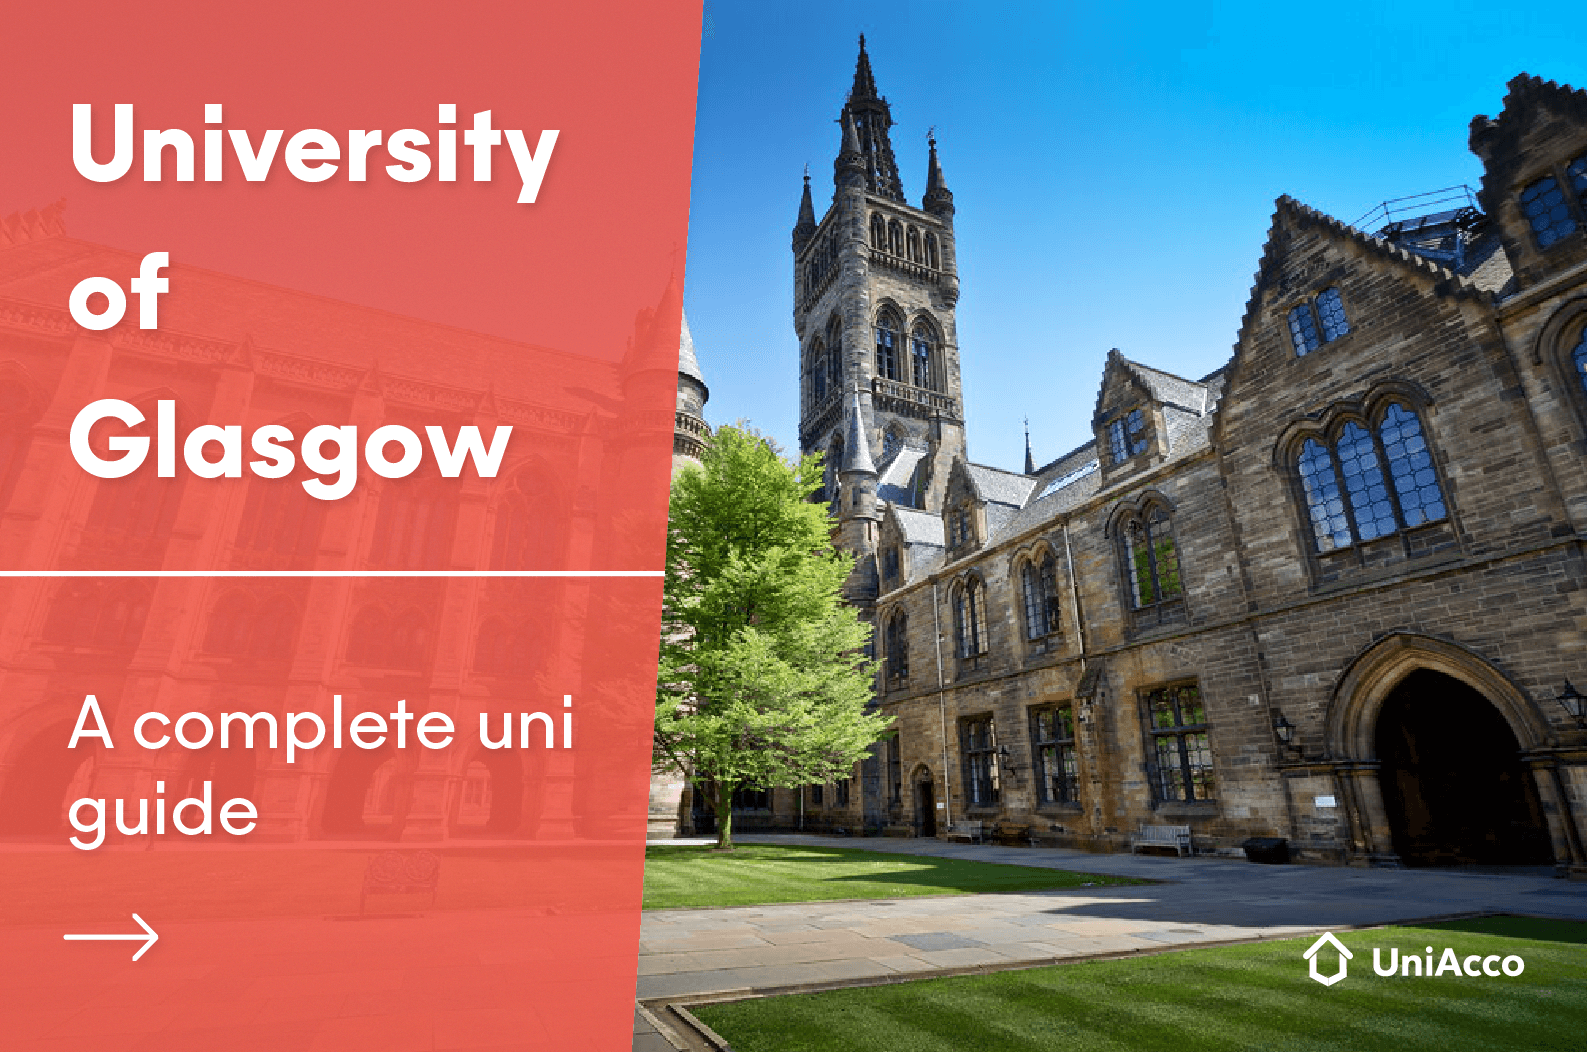 The University of Glasgow, a Complete University Guide